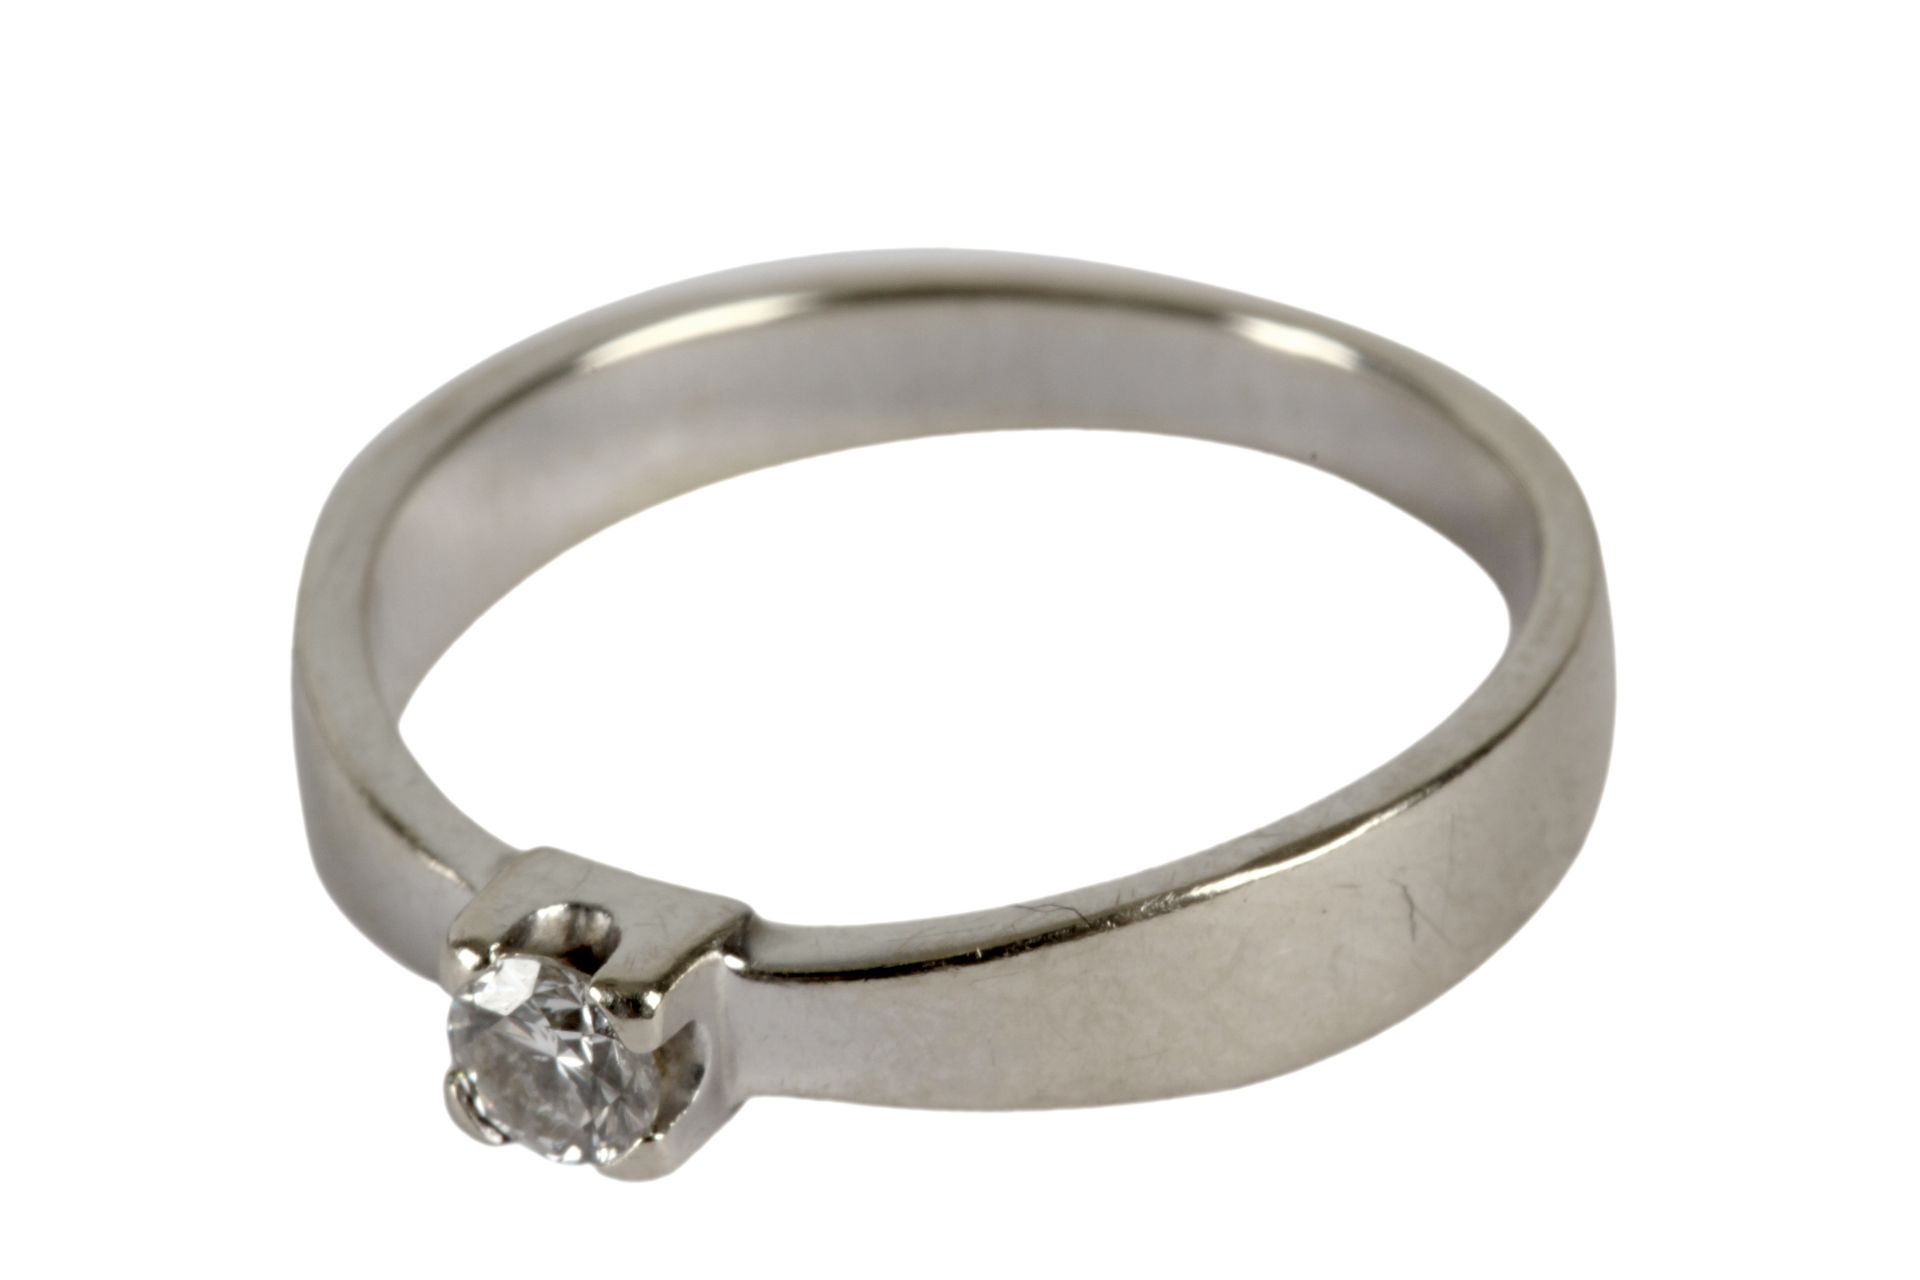 Diamond solitaire ring with a 0,12 ct. brilliant cut diamond and an 18k. white gold setting - Image 2 of 2